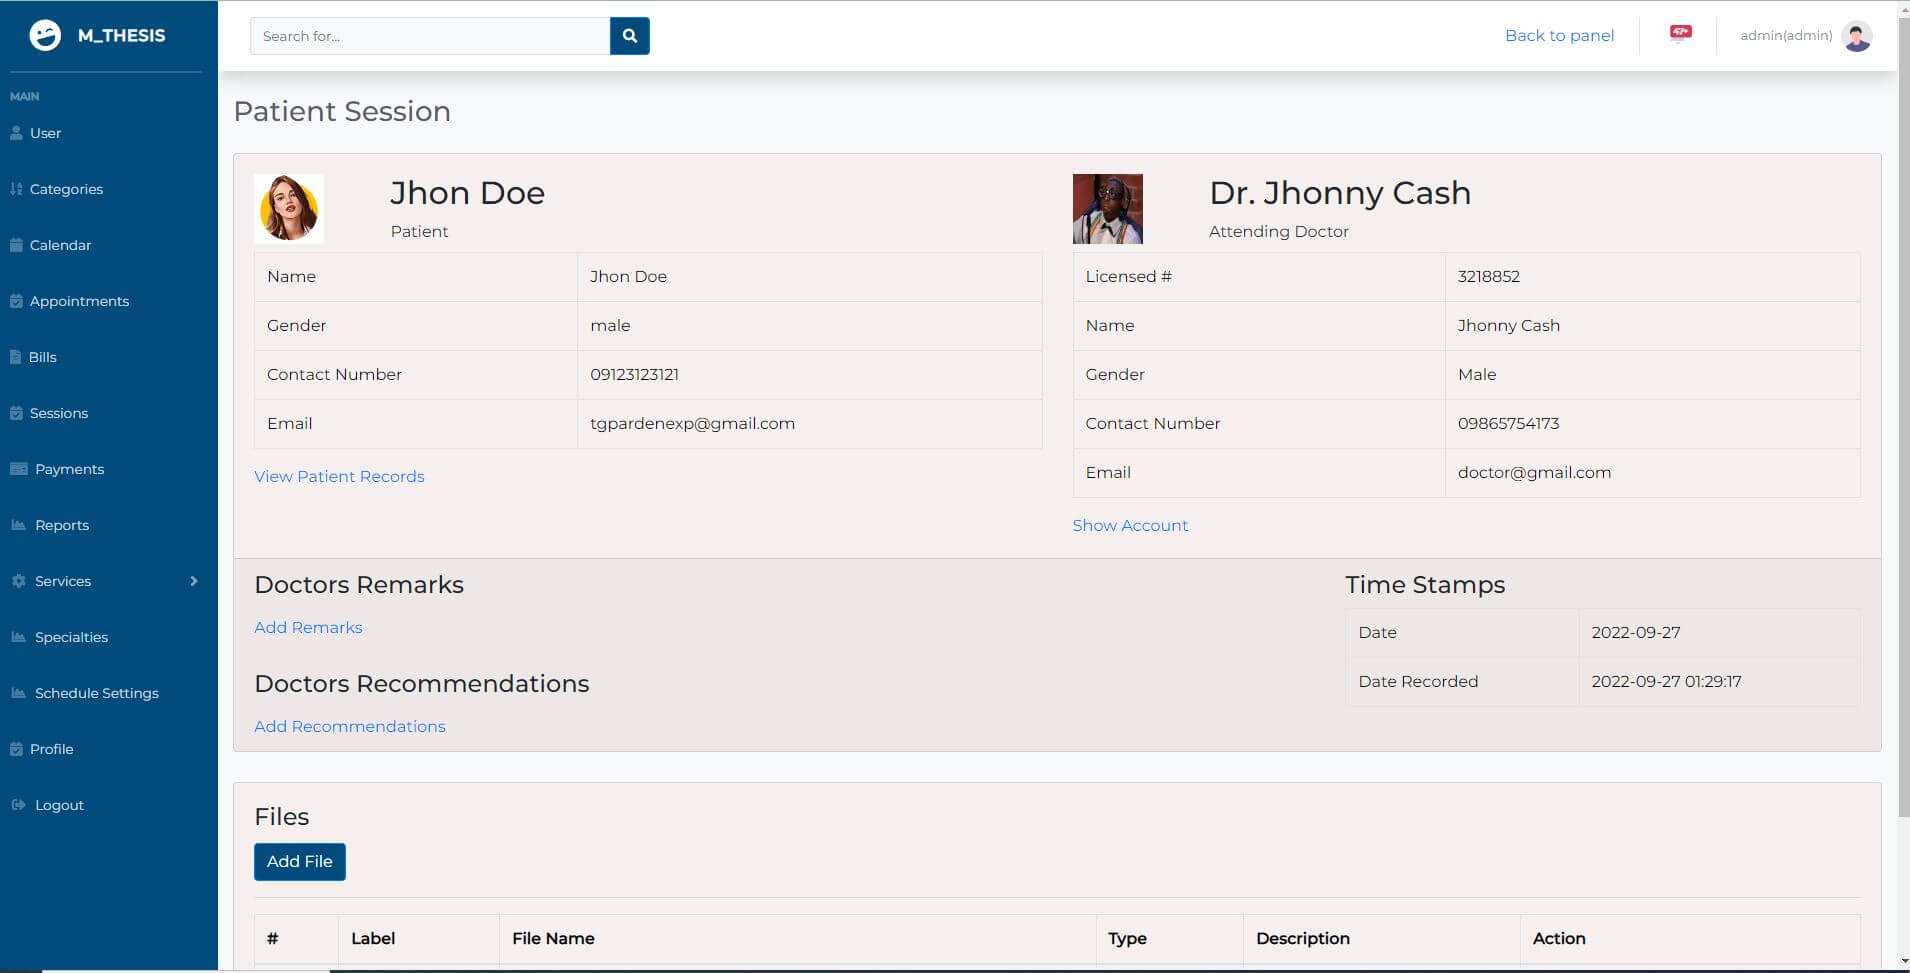 Healthcare Management System with Online Appointment and Payment - Patient Session